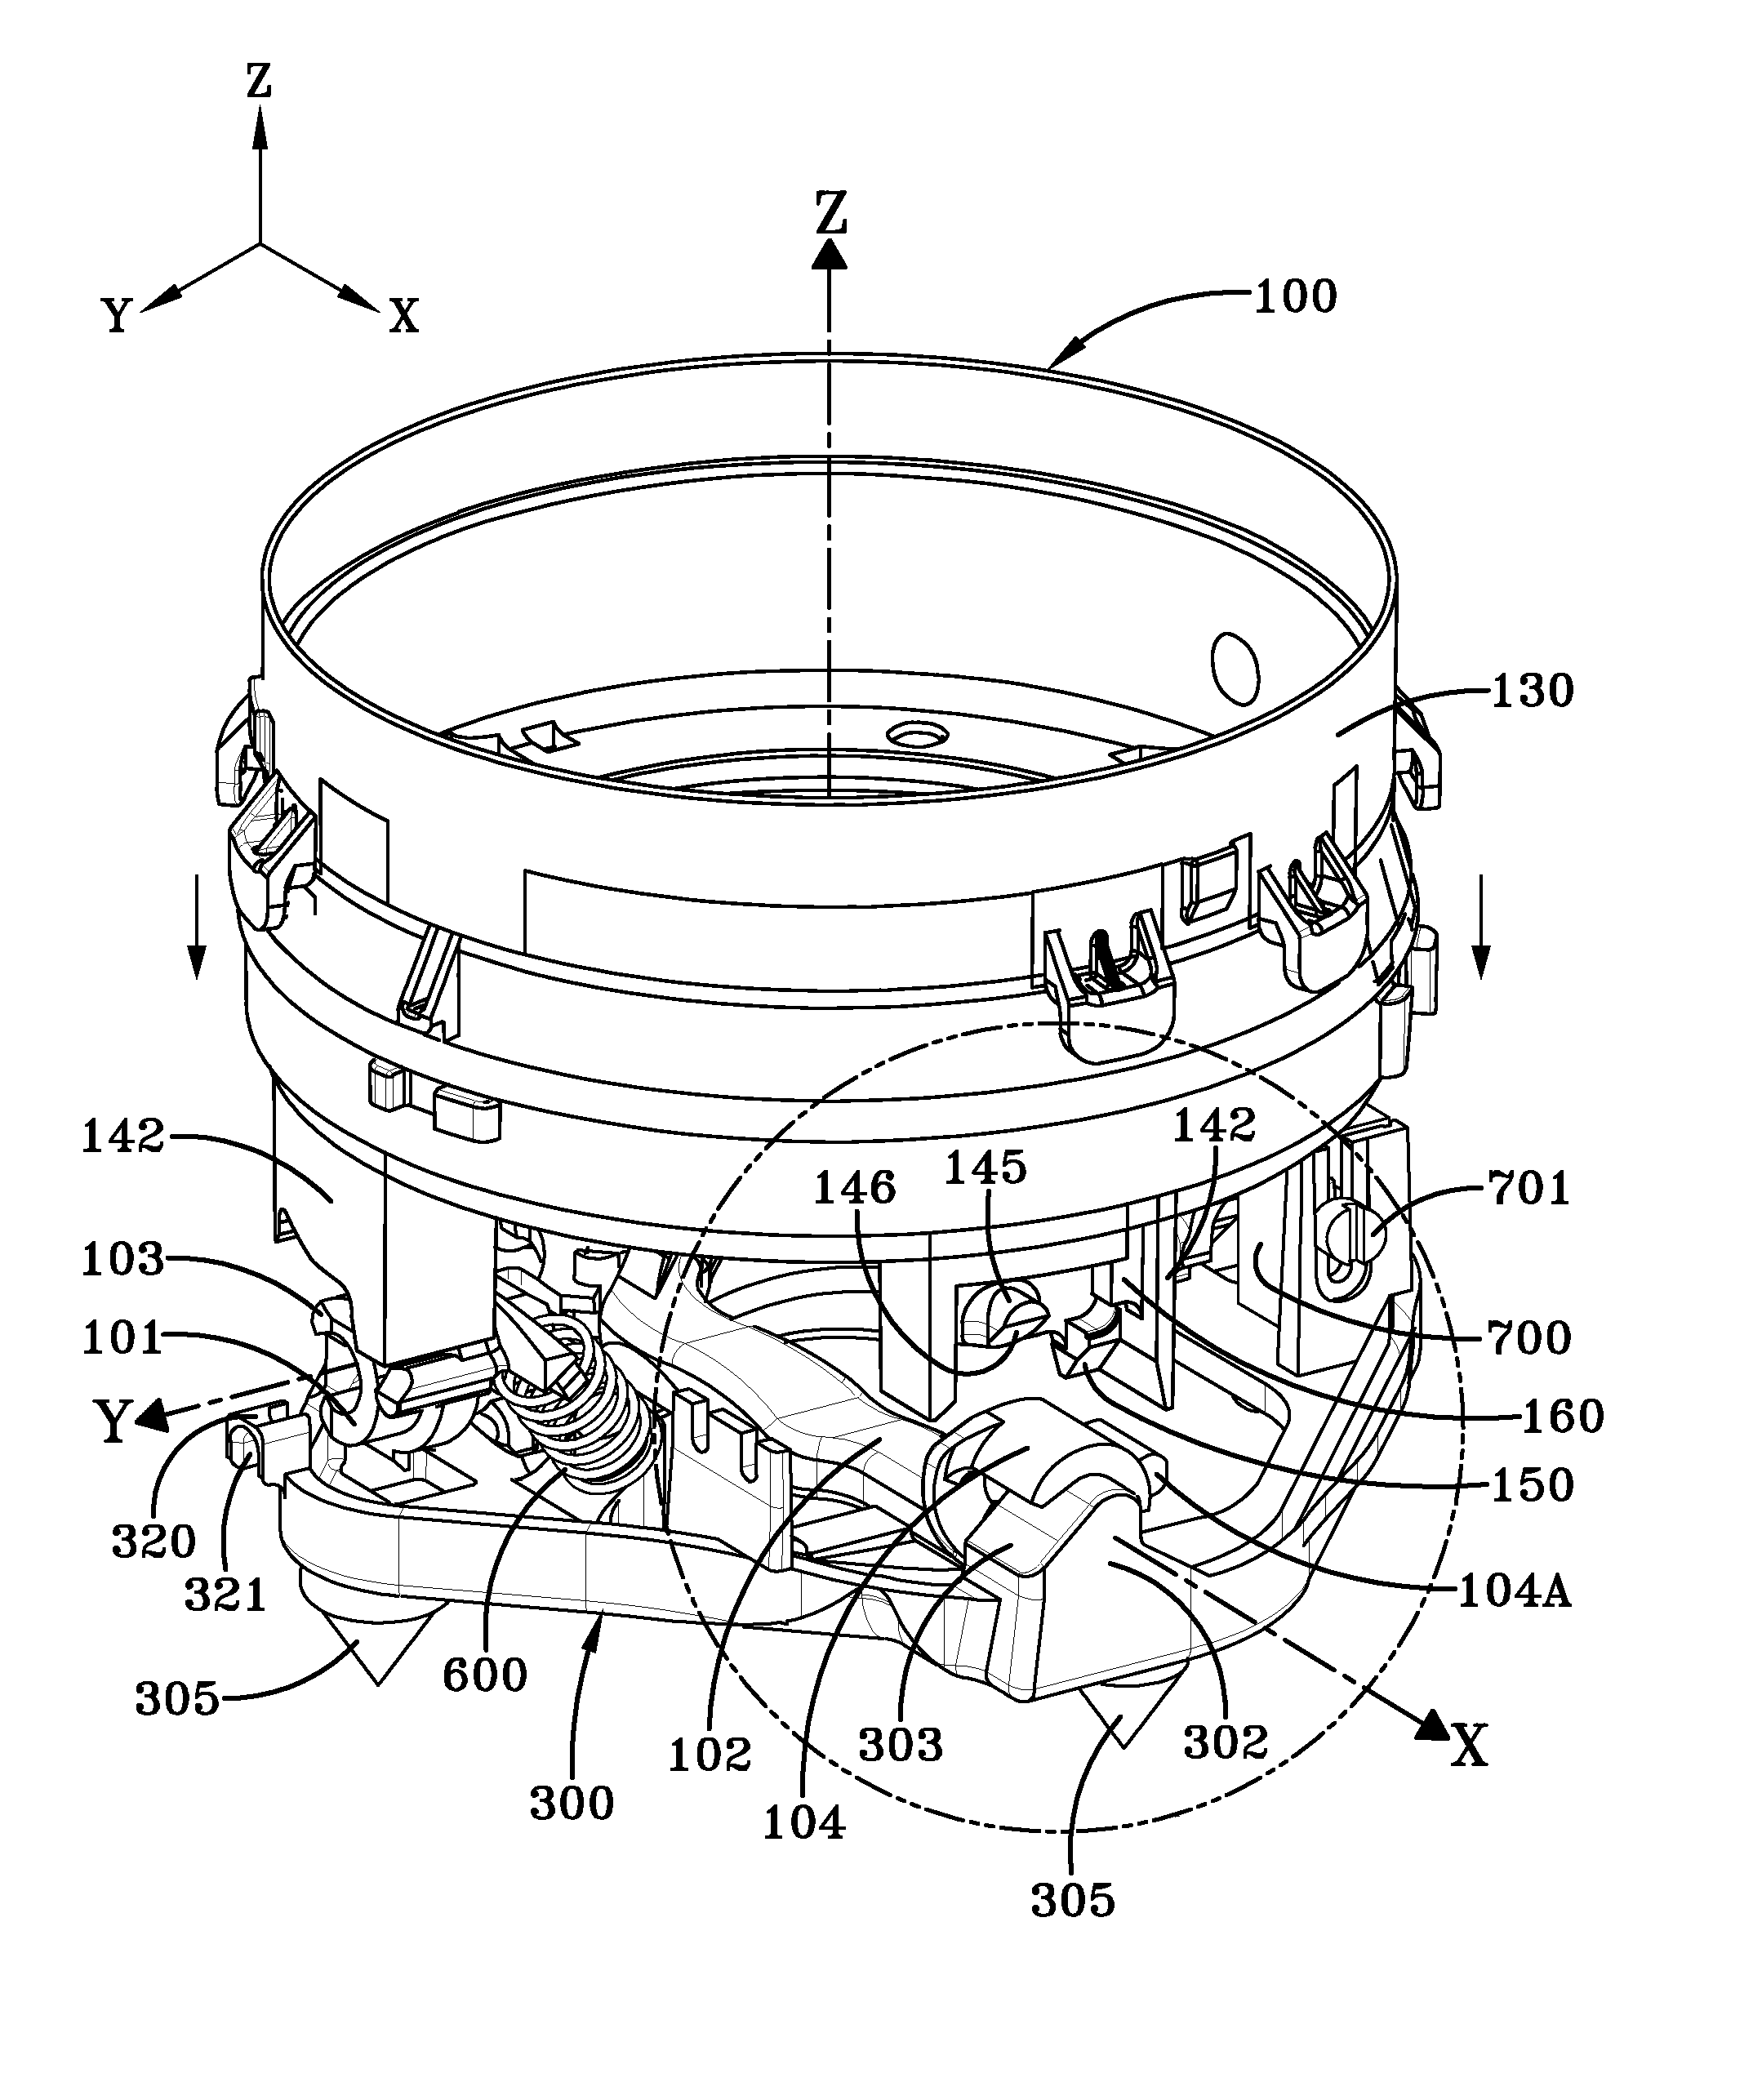 Assembly for retaining an airbag module to a steering wheel